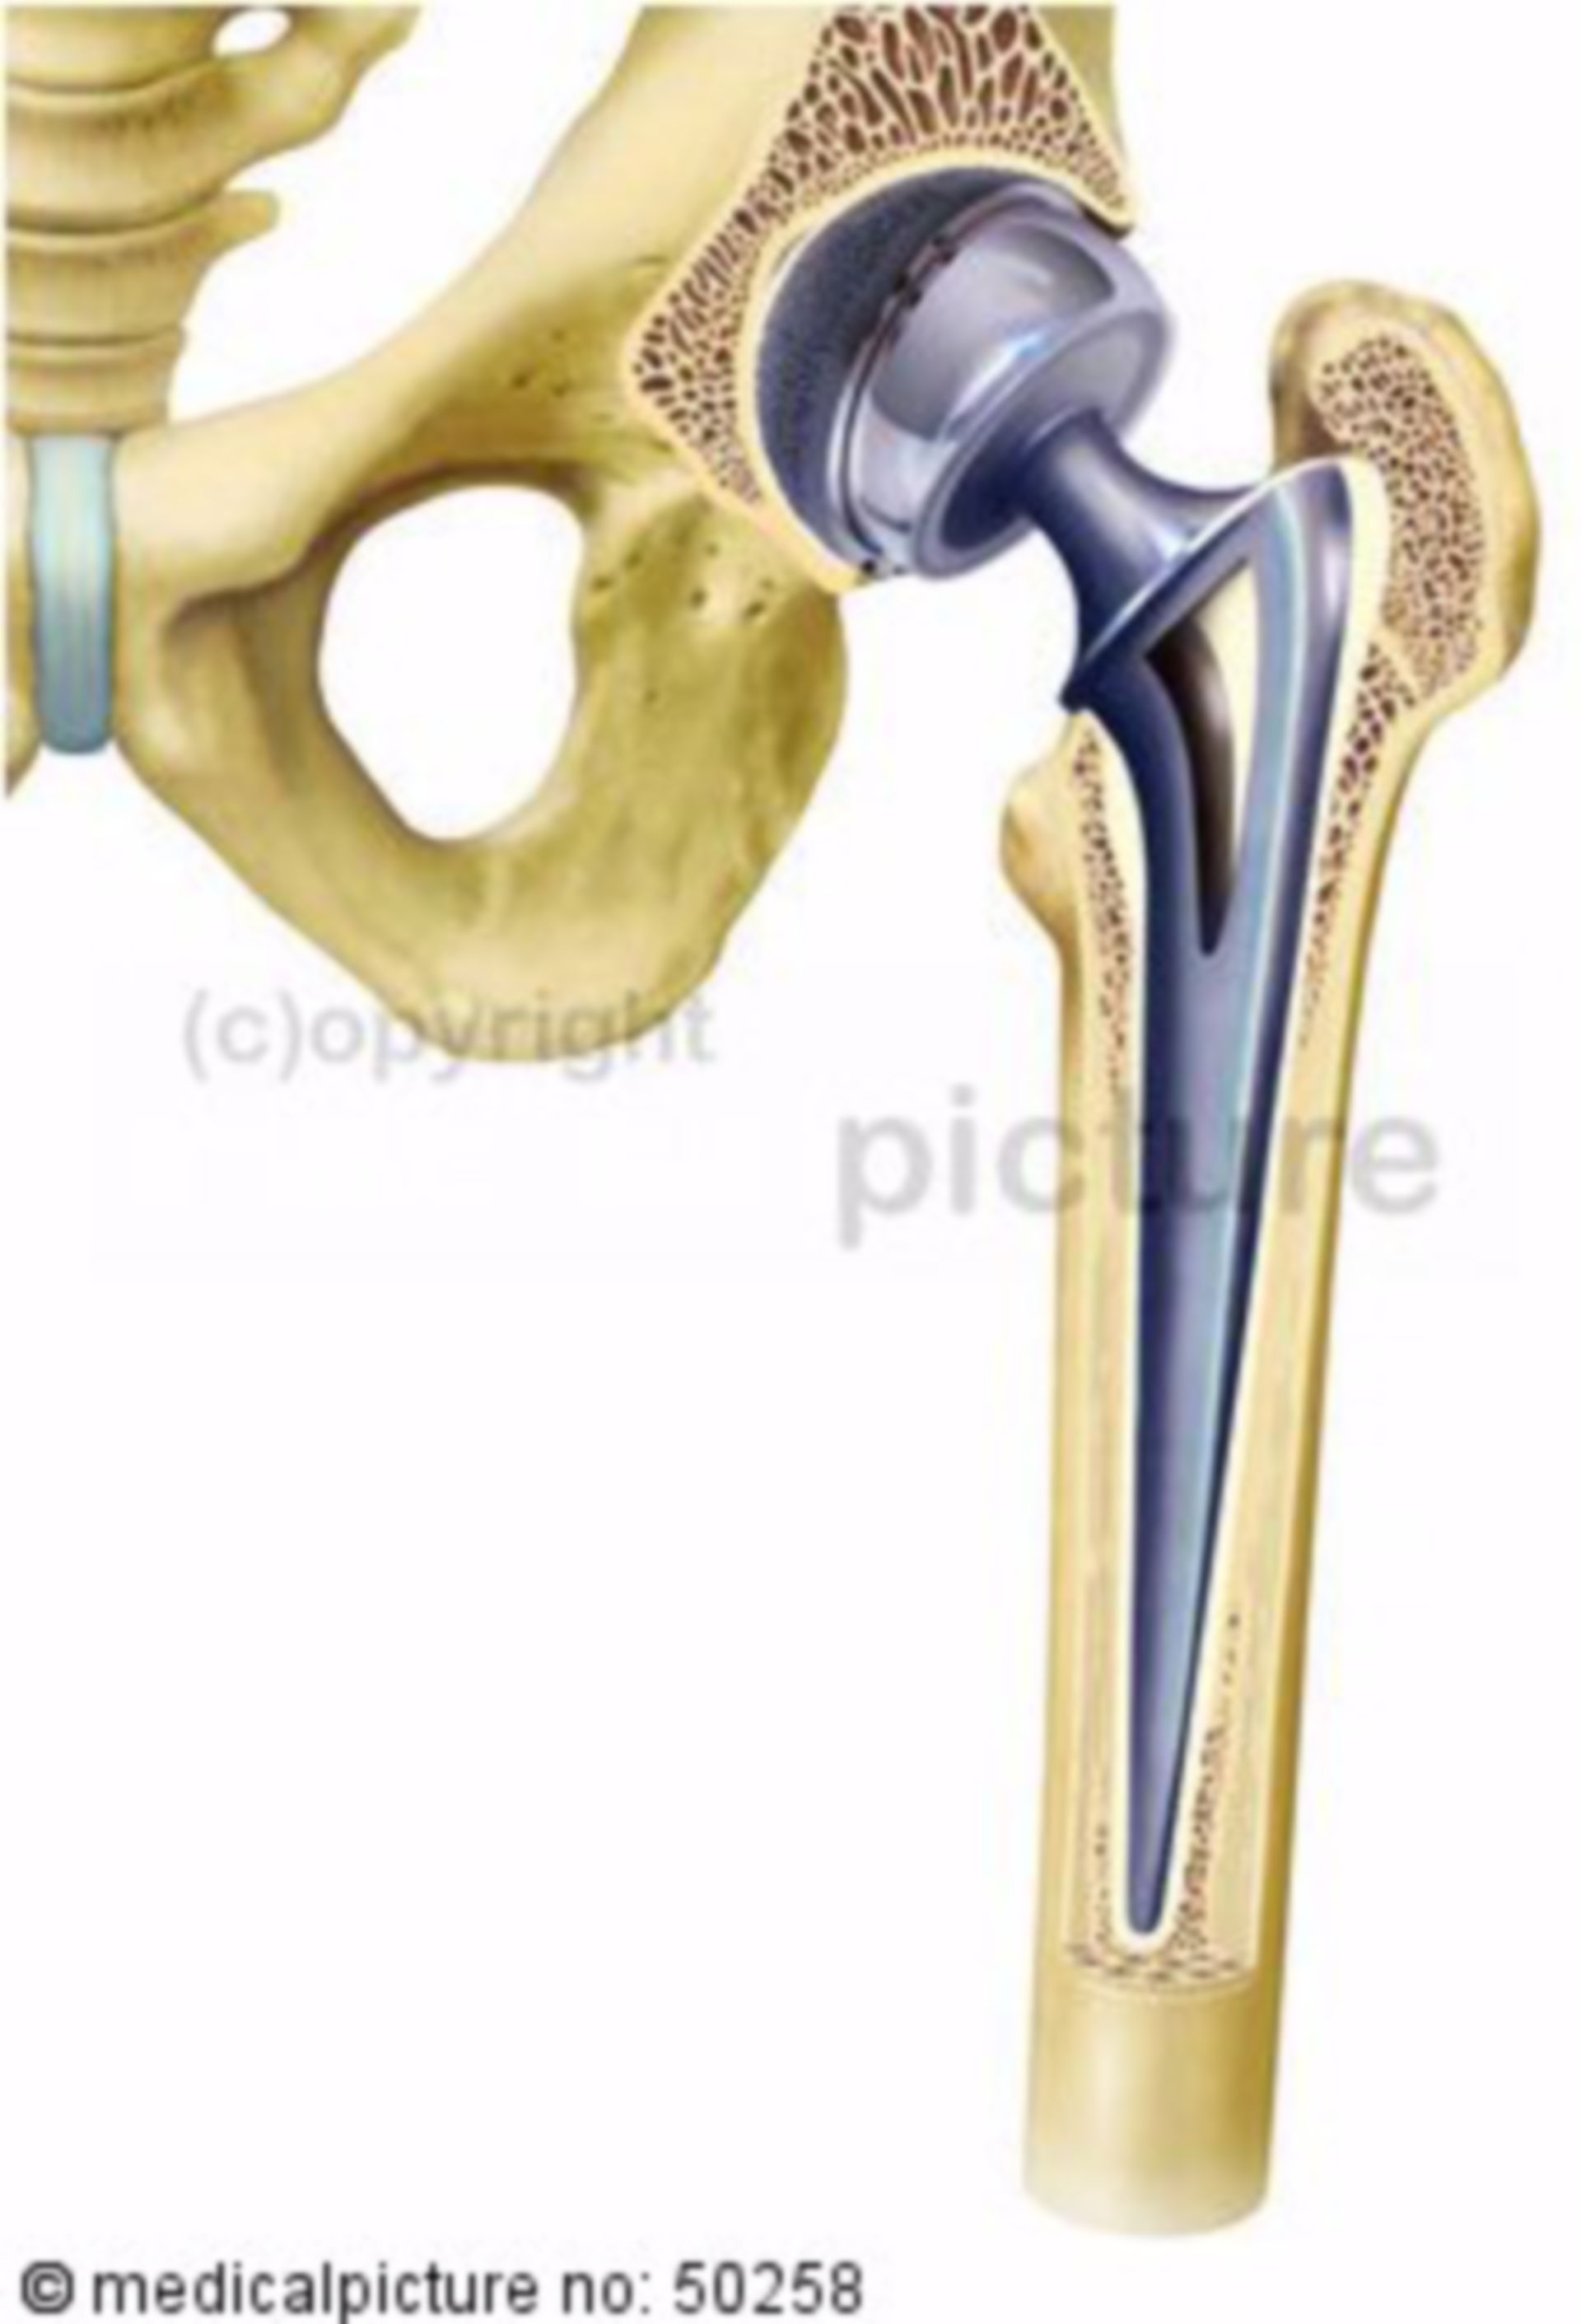 Artificial hip joint, endoprothesis